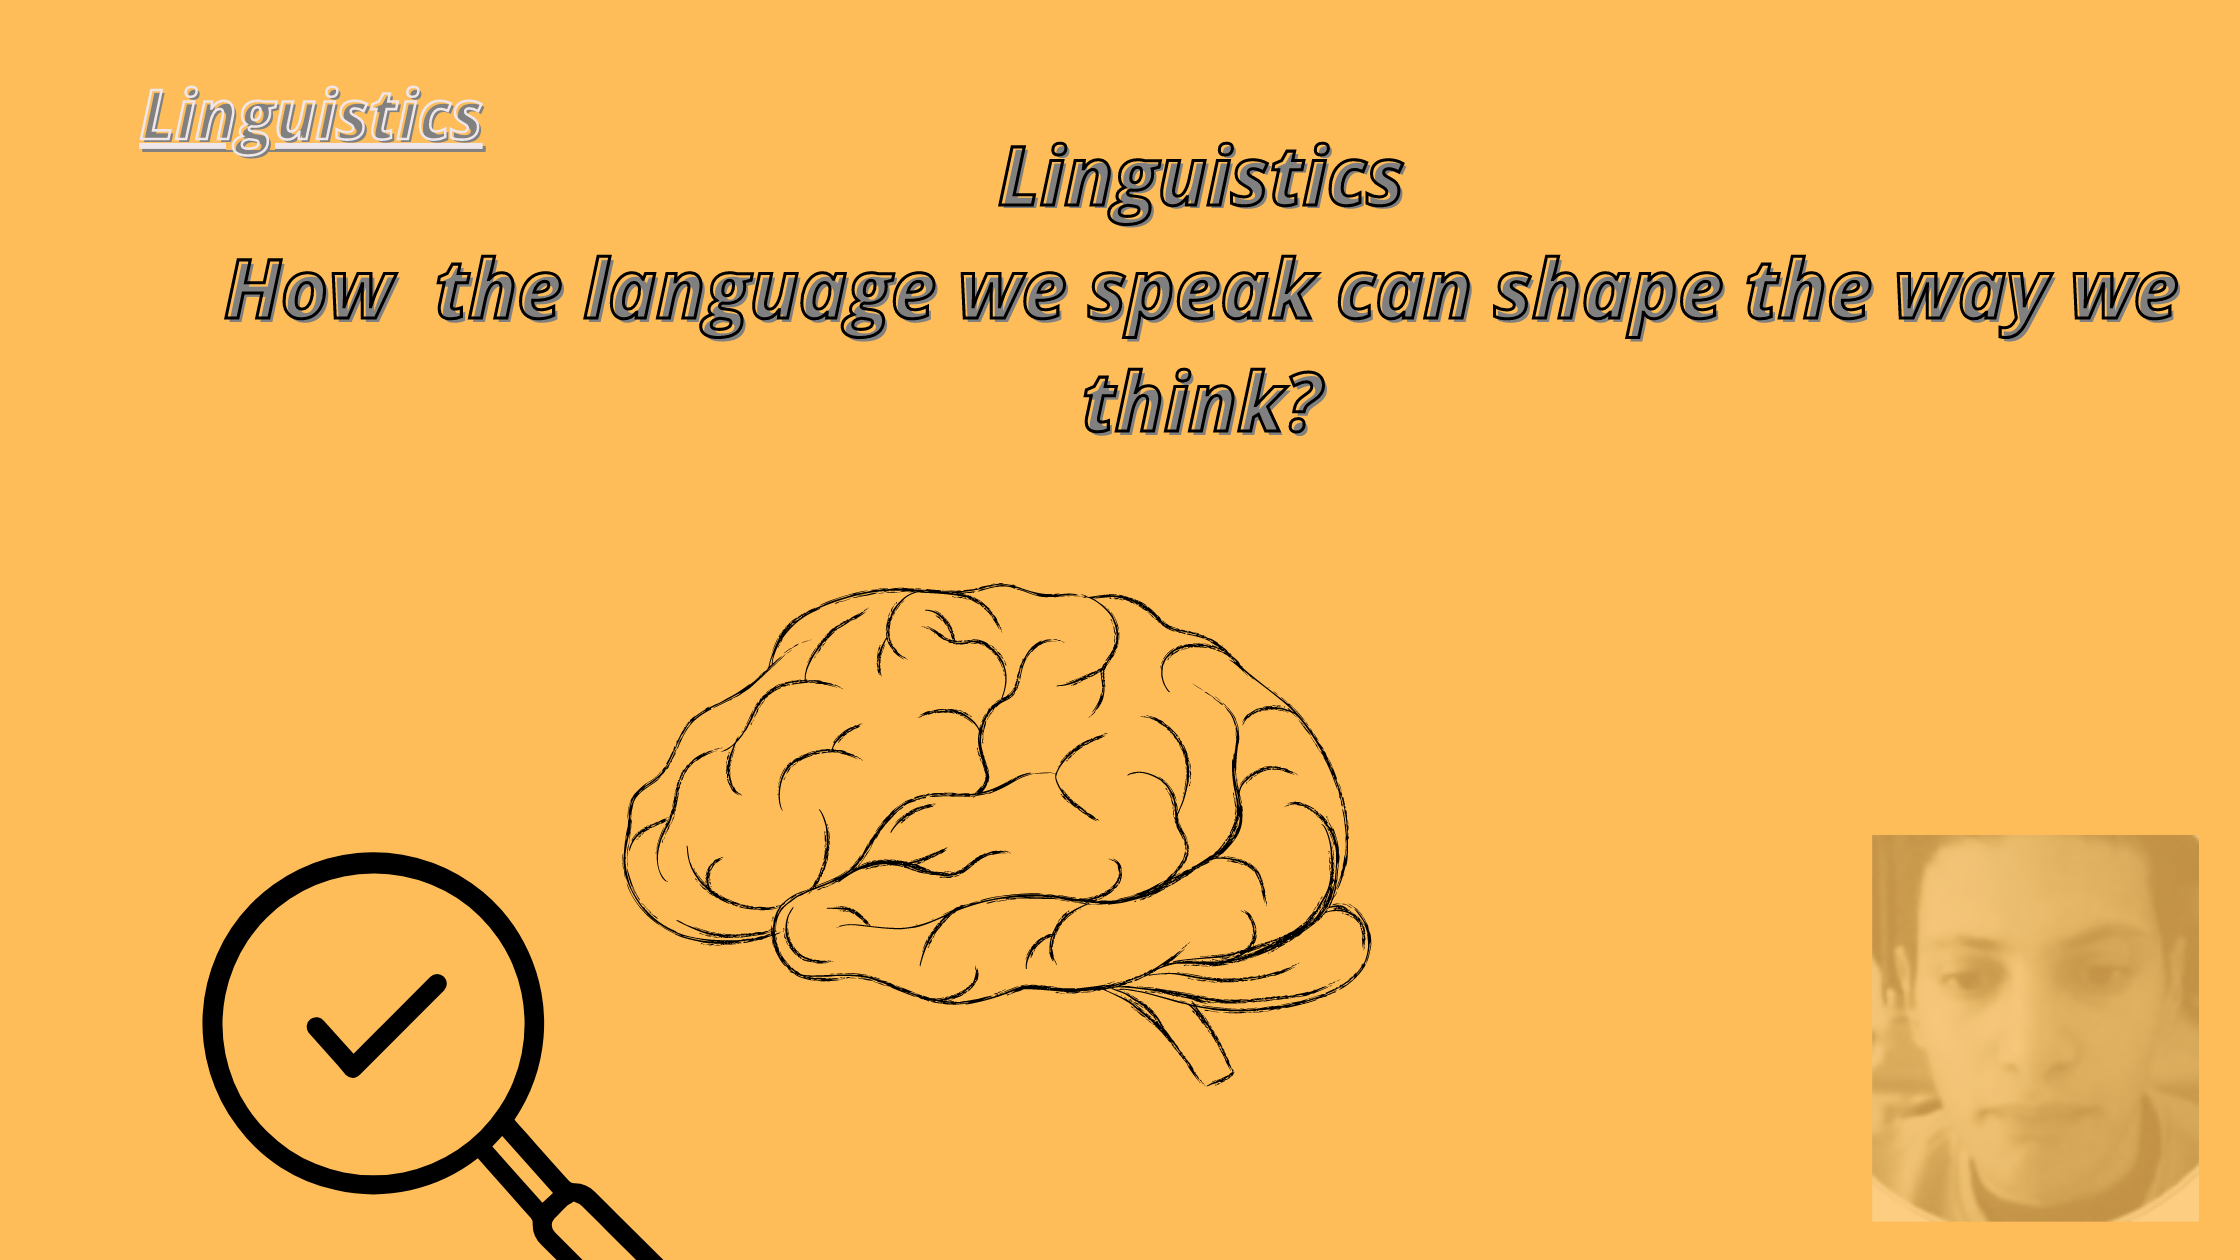 How  the language we speak can shape the way we think?